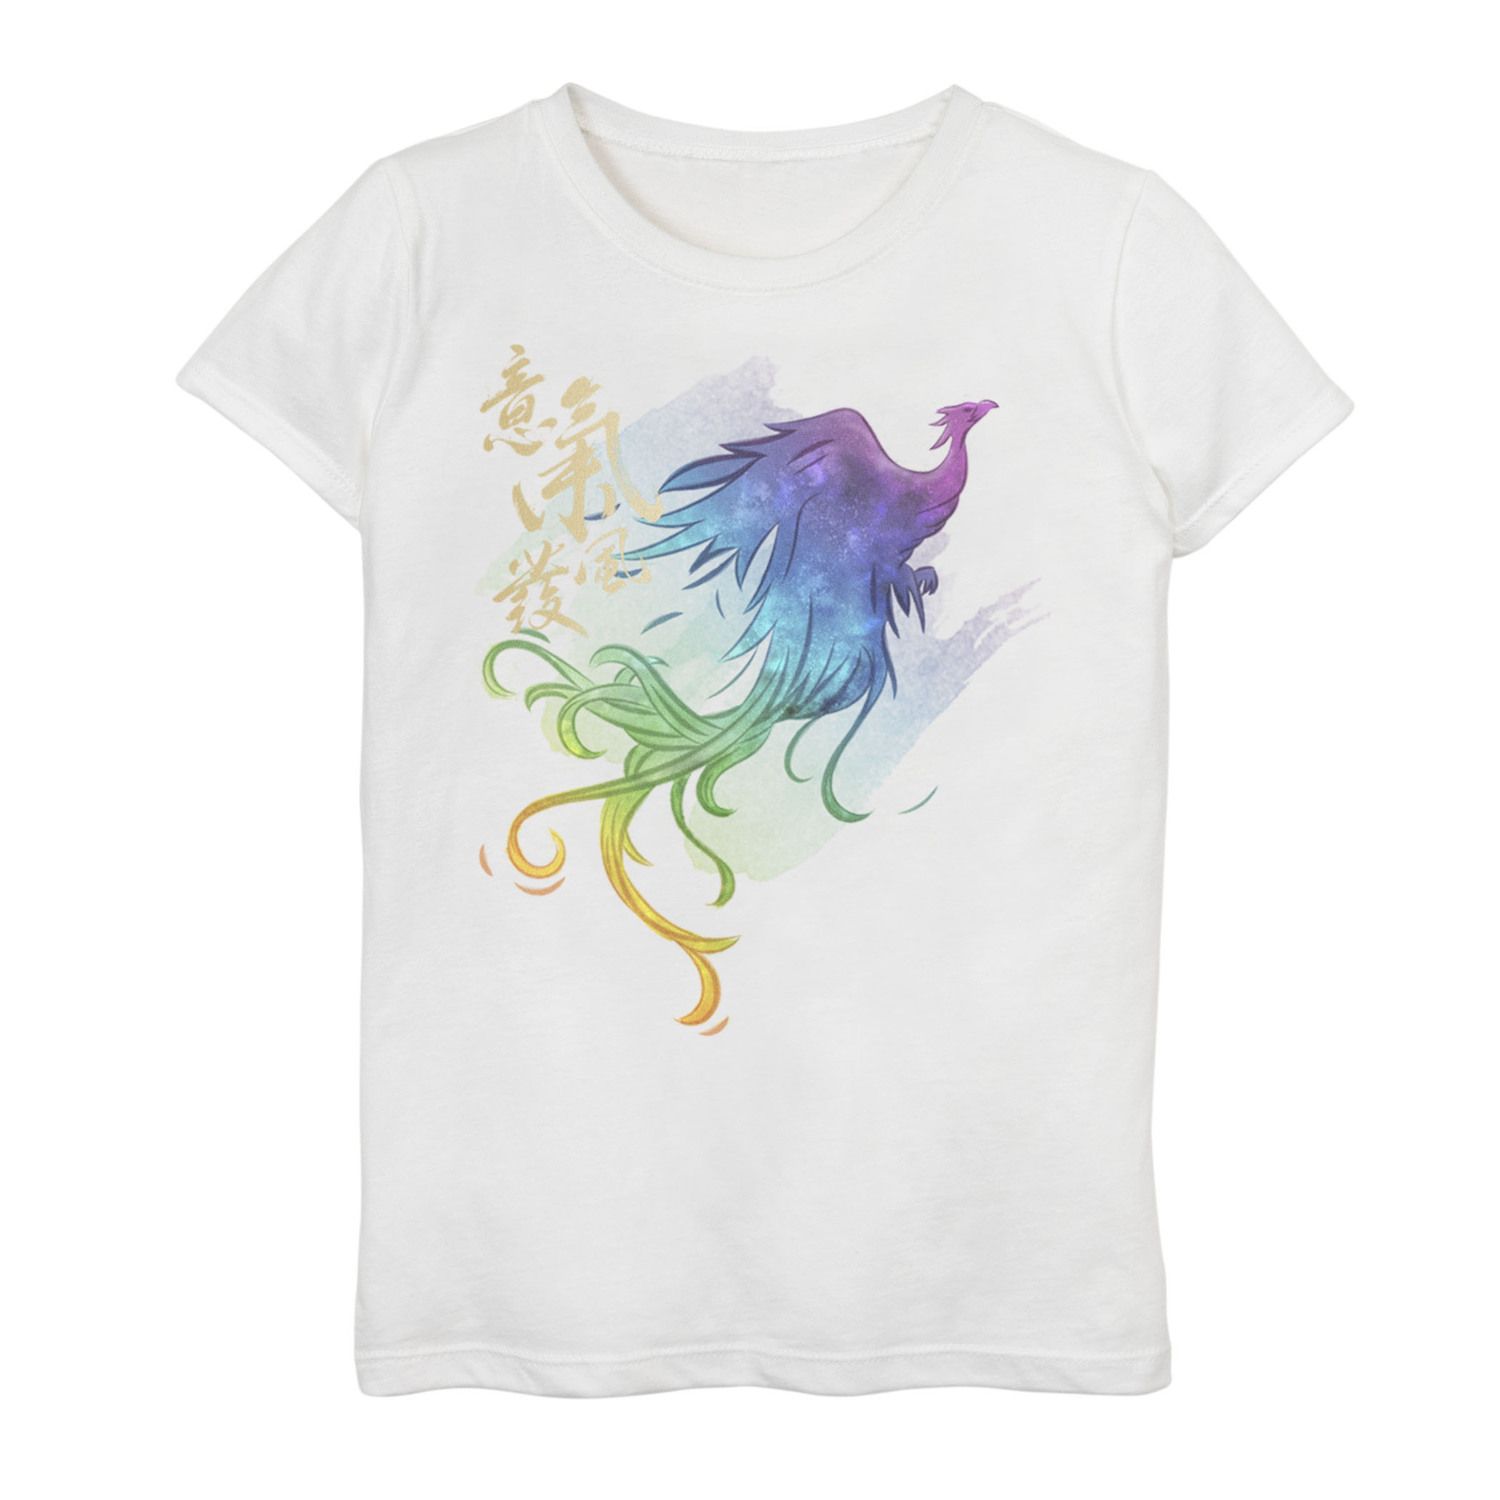 Image for Disney 's Mulan Girls 7-16 Live Action Phoenix Watercolor Graphic Tee at Kohl's.